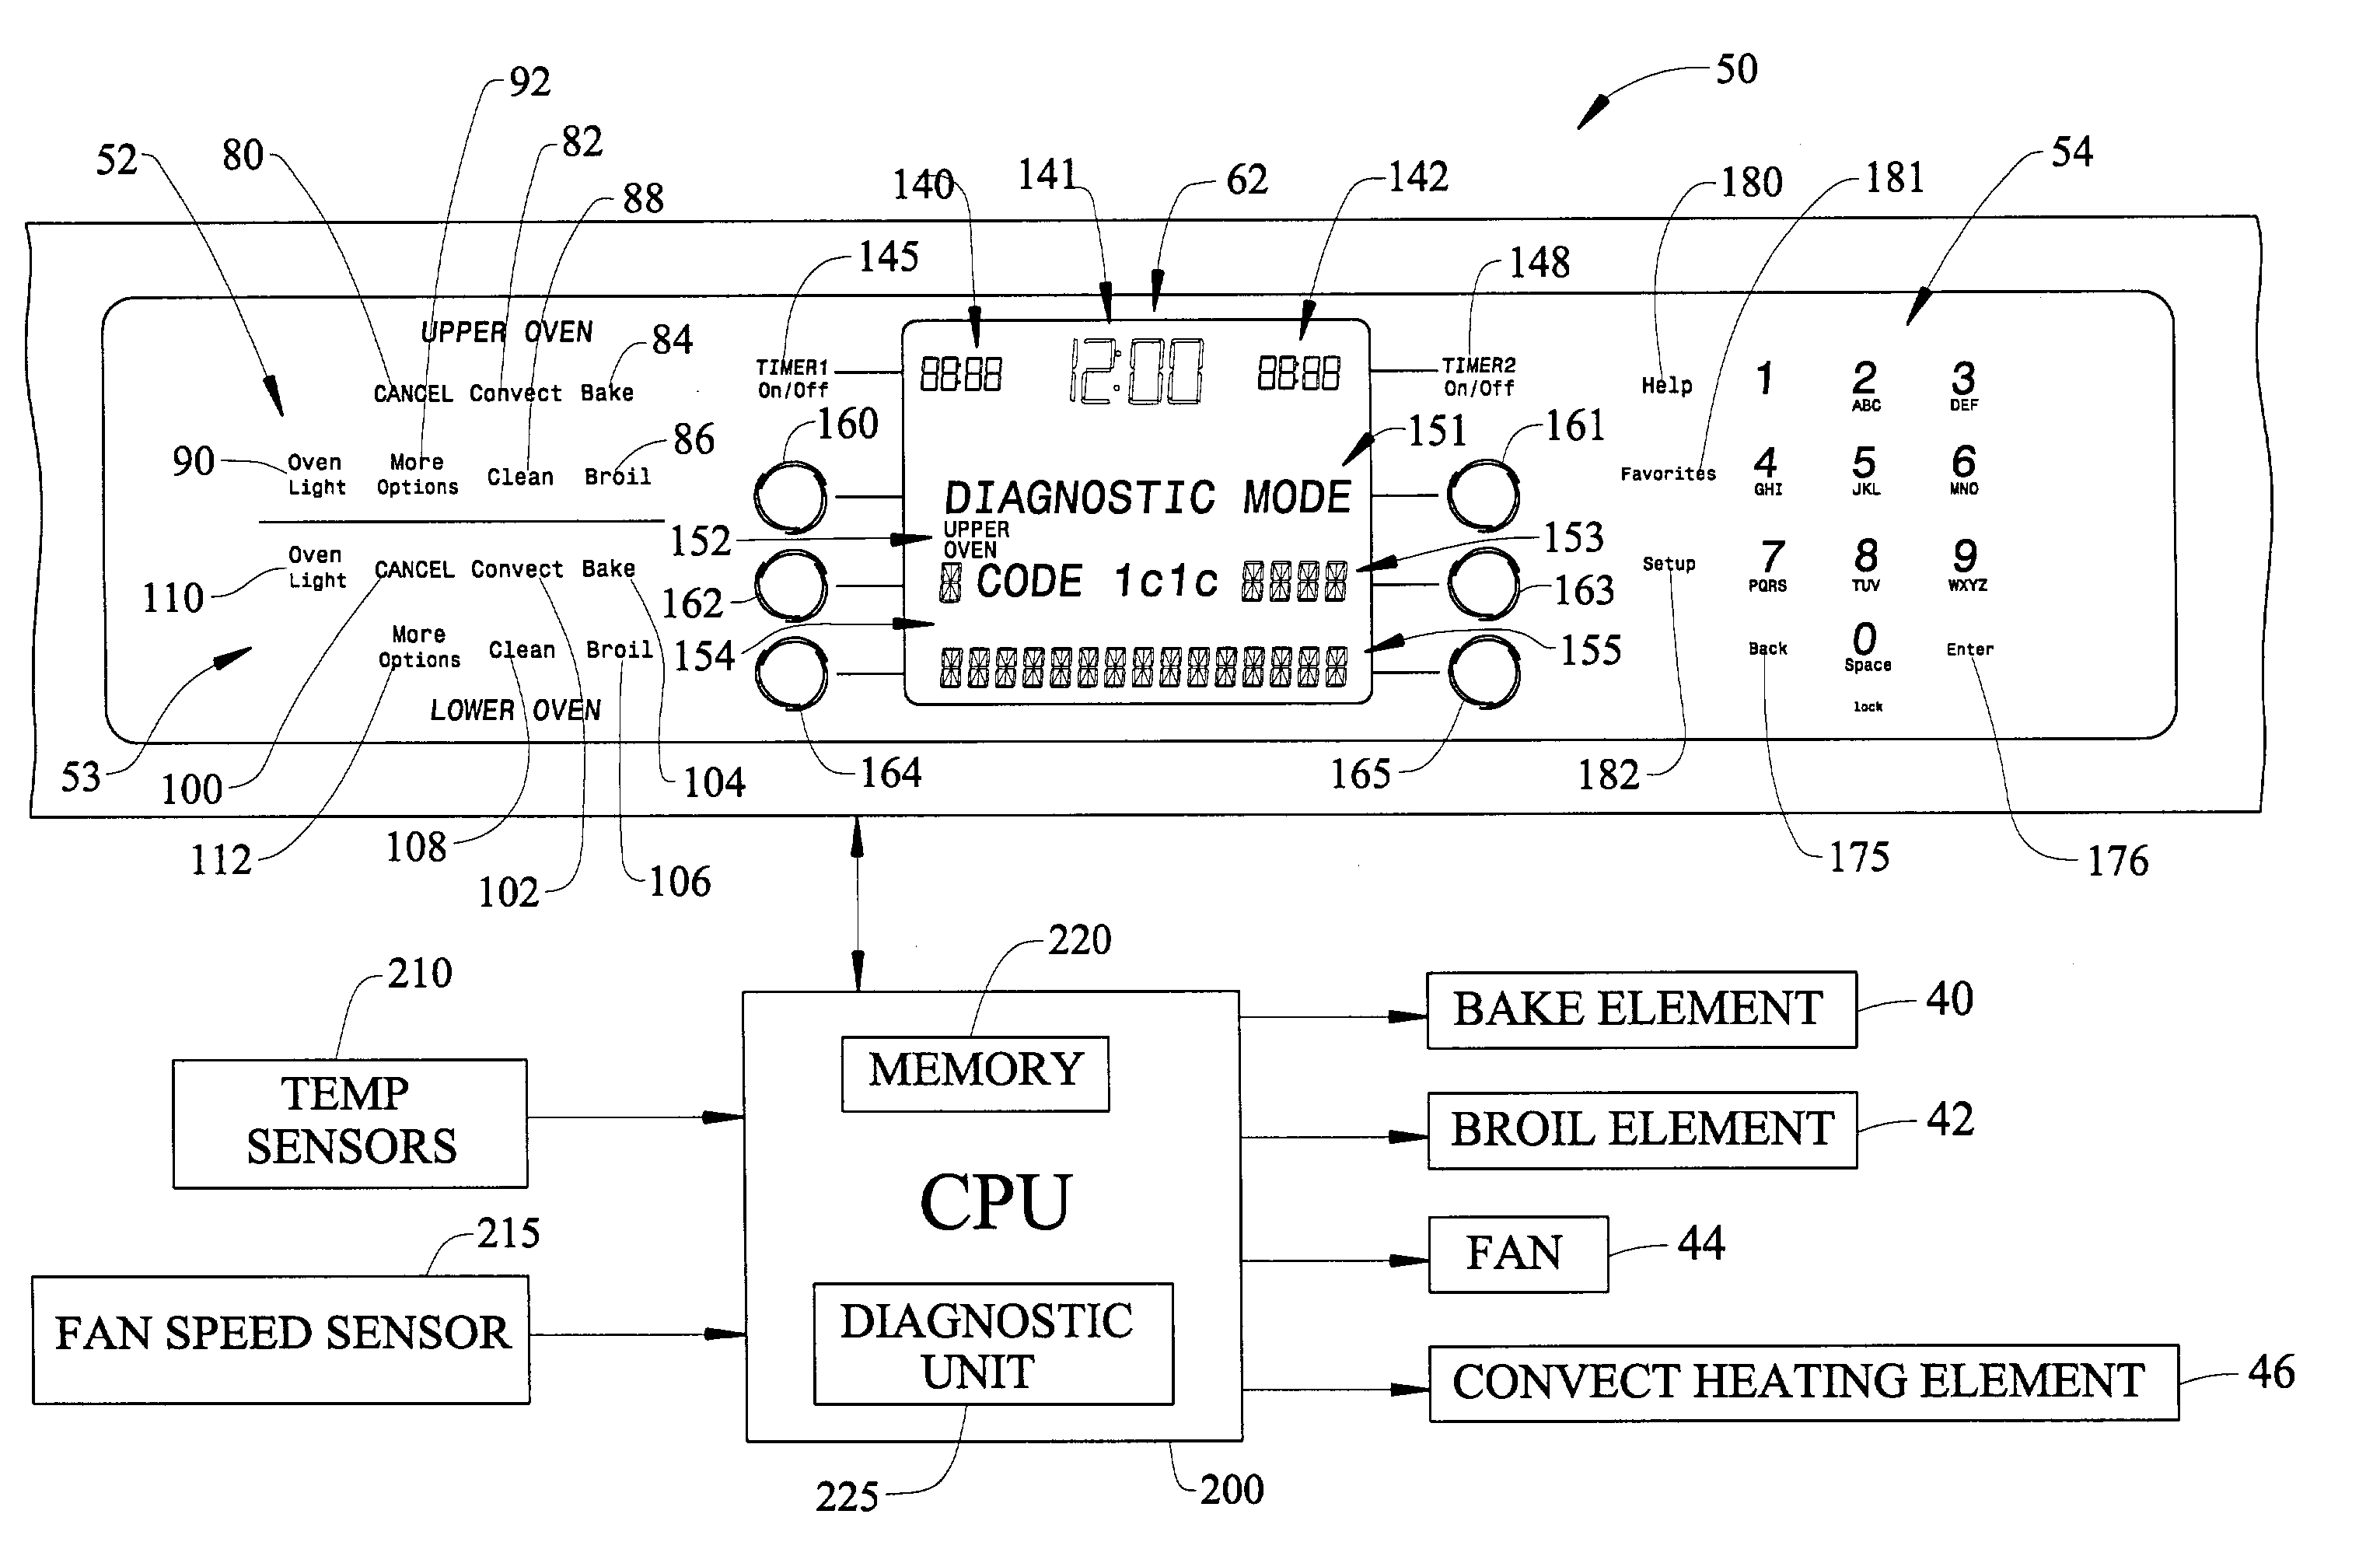 Diagnostic system for an appliance